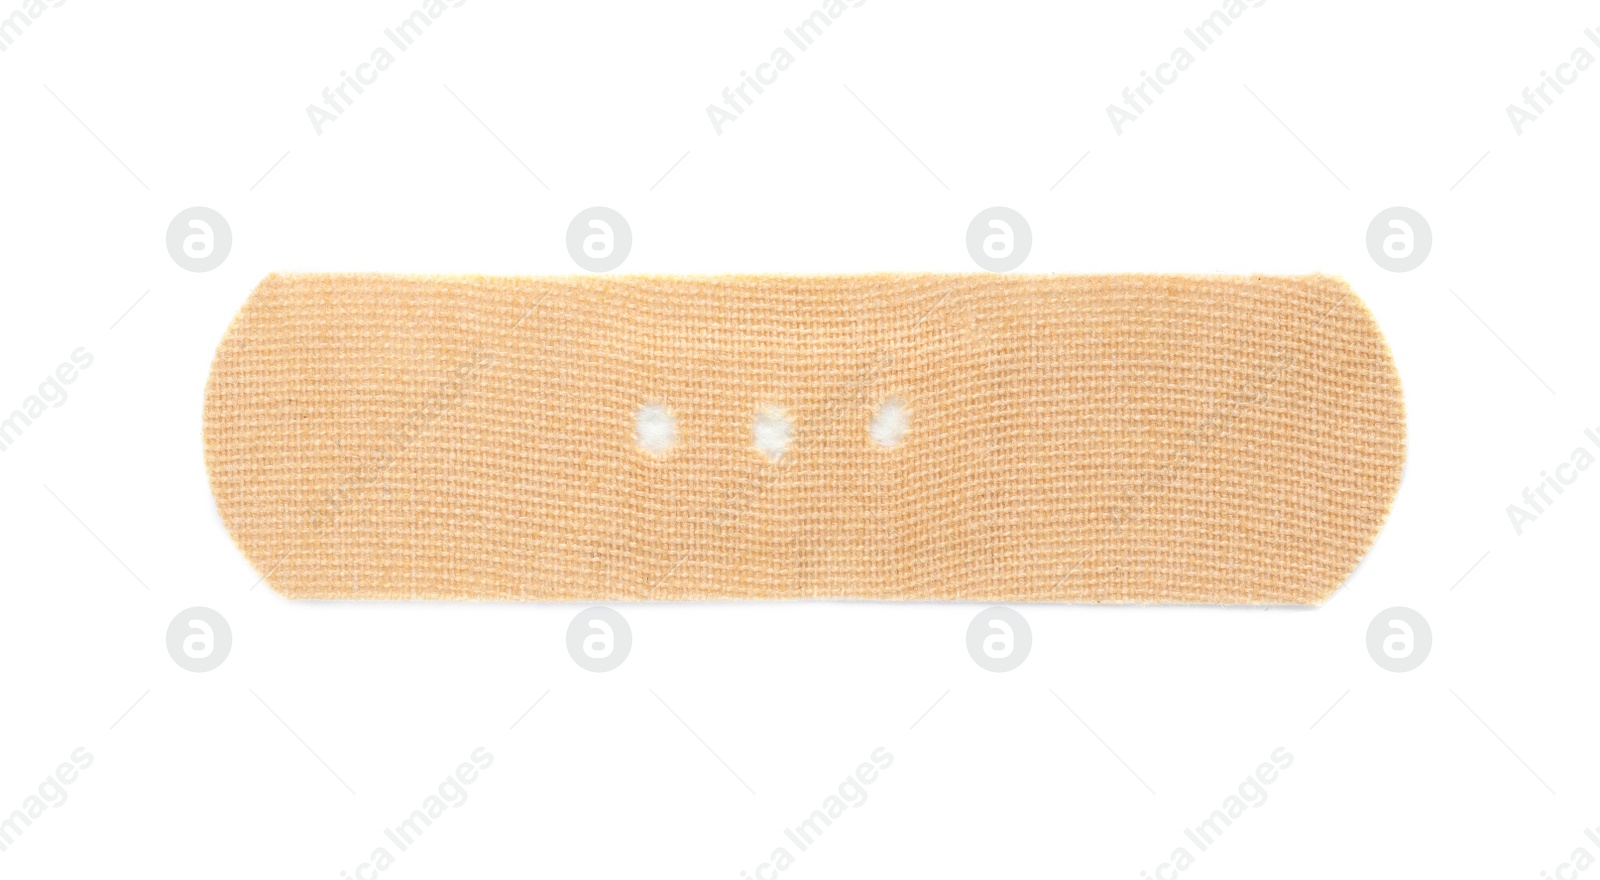 Photo of Adhesive plaster on white background, top view. Medical item